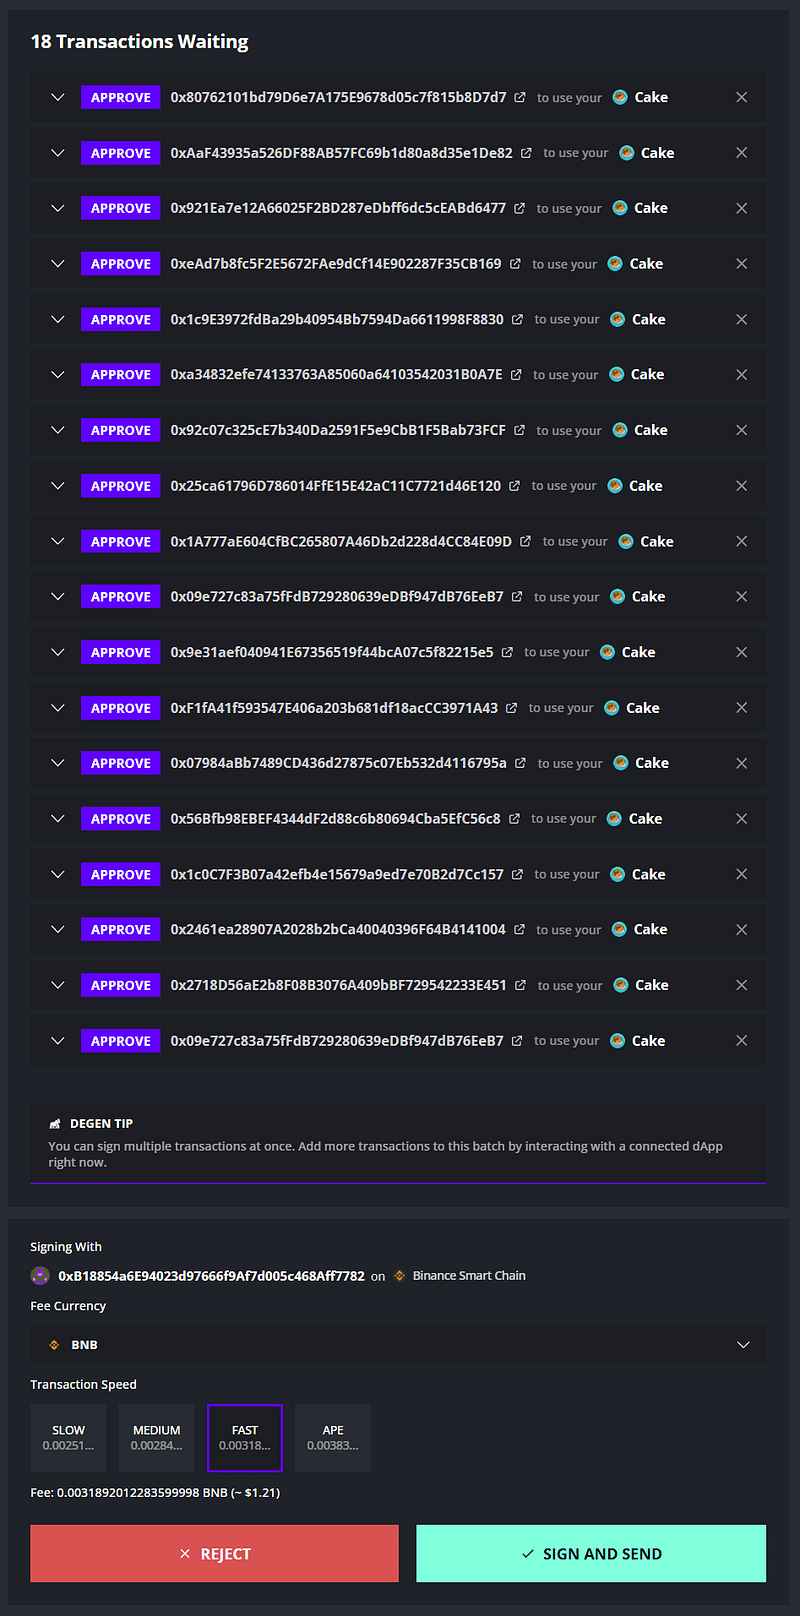 A screenshot showing 18 transactions pending in the Ambire Wallet